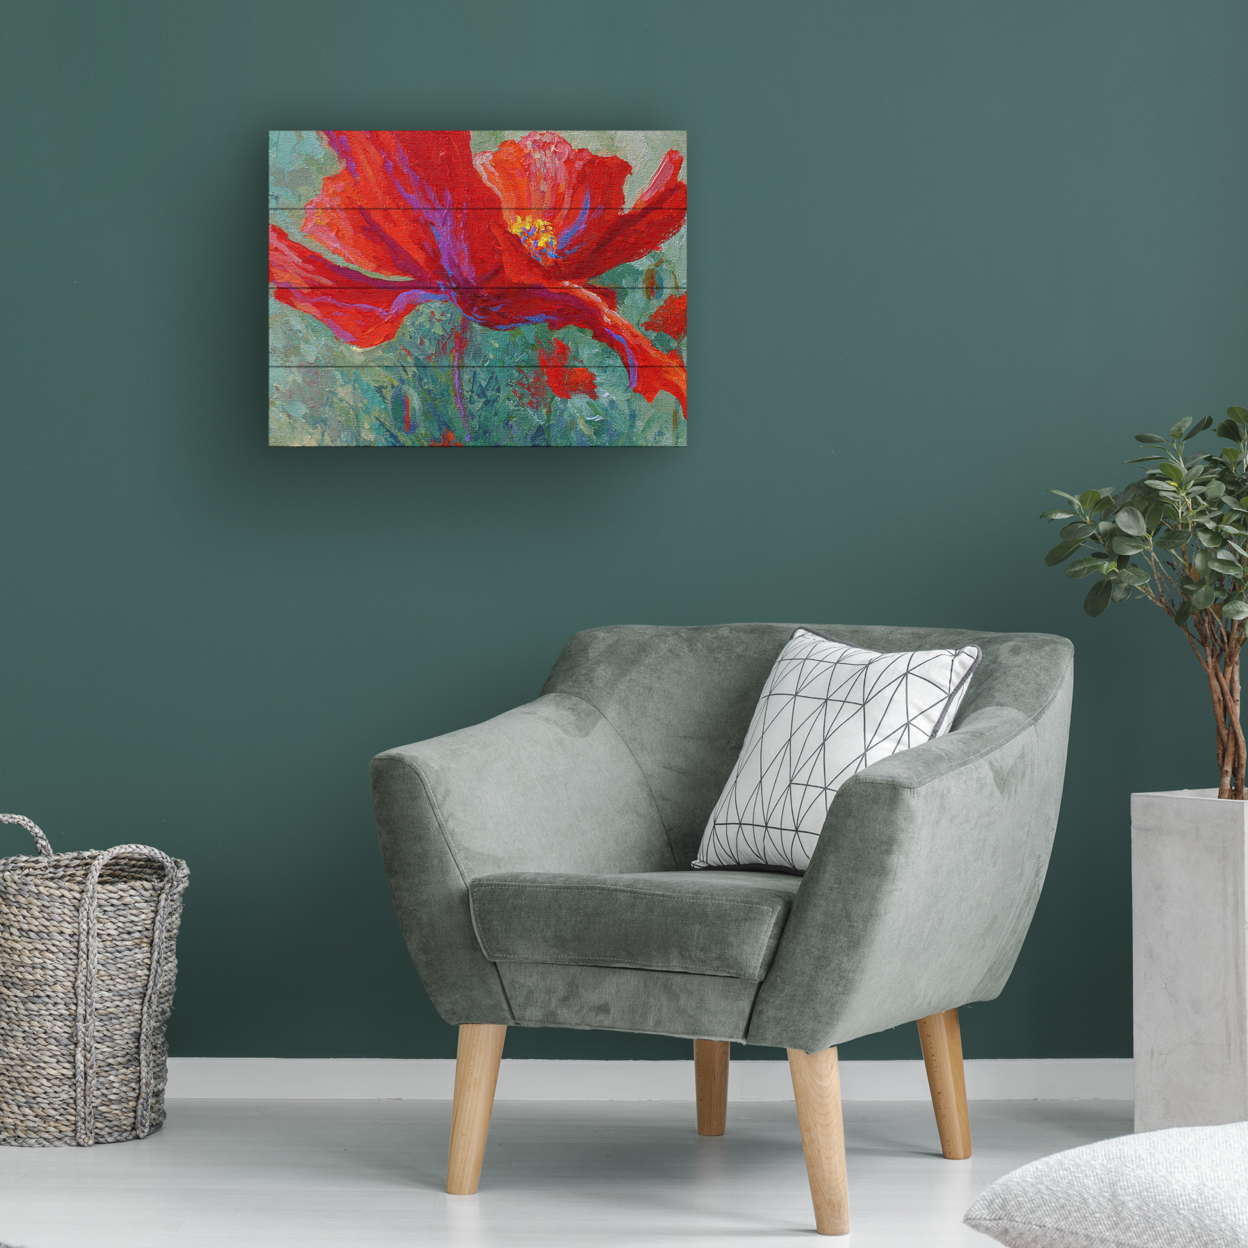 Wall Art 12 X 16 Inches Titled Red Poppy 1 Ready To Hang Printed On Wooden Planks